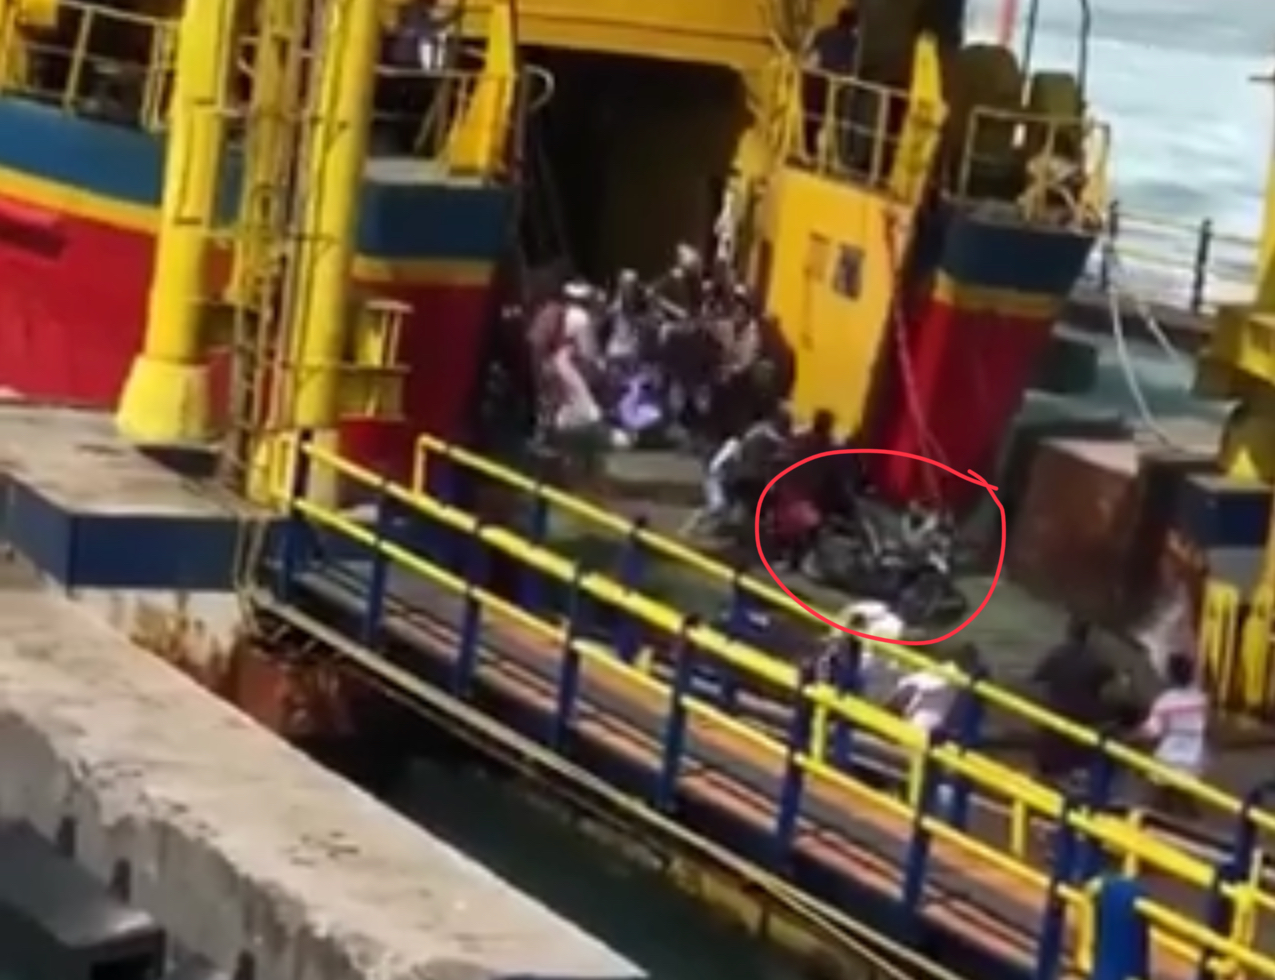 A video posted online shows the choppy waves at Padang Bai. People and motorbikes boarding the boat get knocked over. Still via @Ridhopramirsyah 